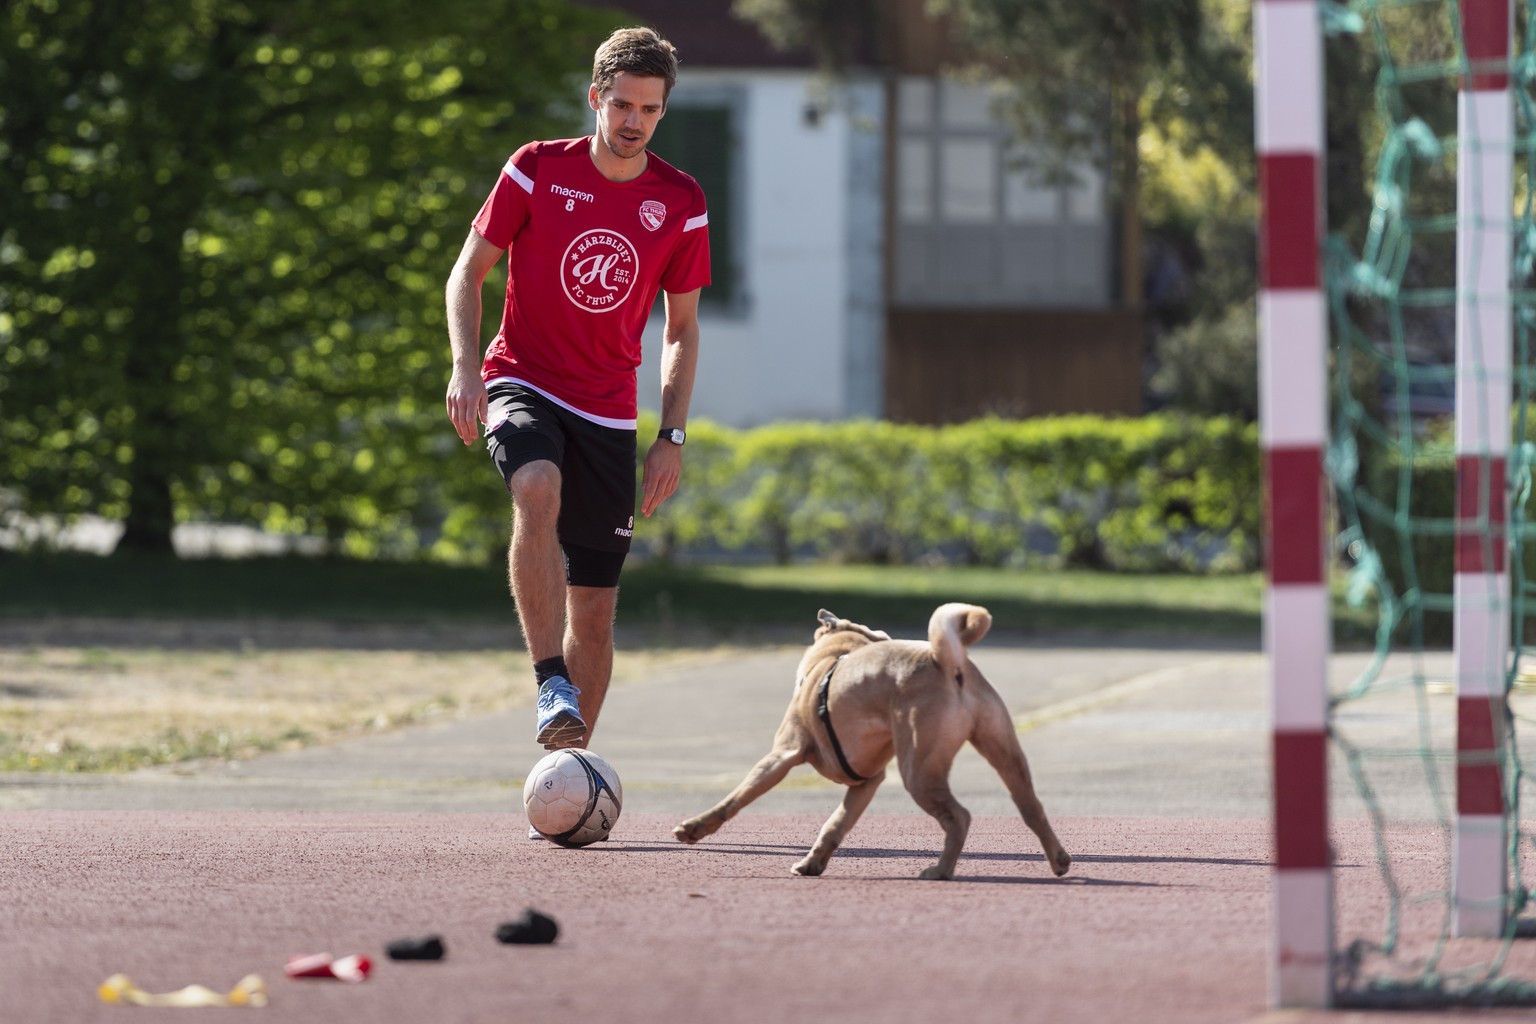 epa08379070 Gregory Greg Karlen, a professional footballer from the Swiss soccer team FC Thun, completes the course his fitness trainer has given him together with his dog, on Thursday, 23 April 2020, ...